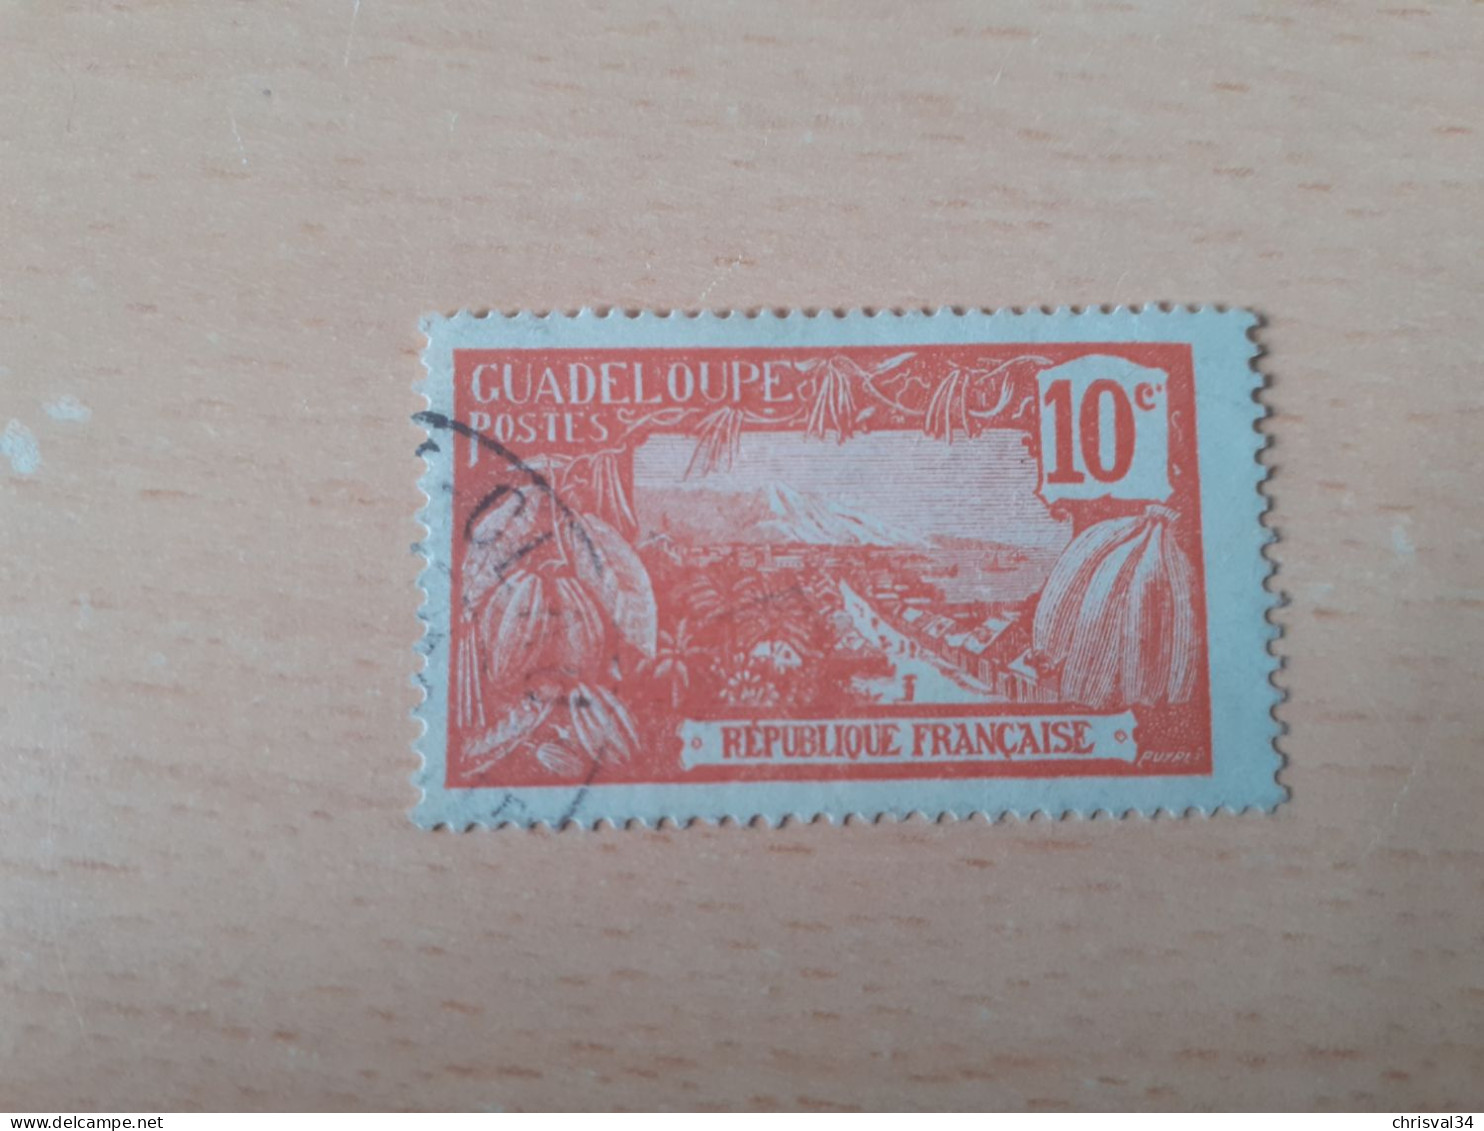 TIMBRE   GUADELOUPE       N  79     COTE  0,25   EUROS  OBLITERE - Gebraucht